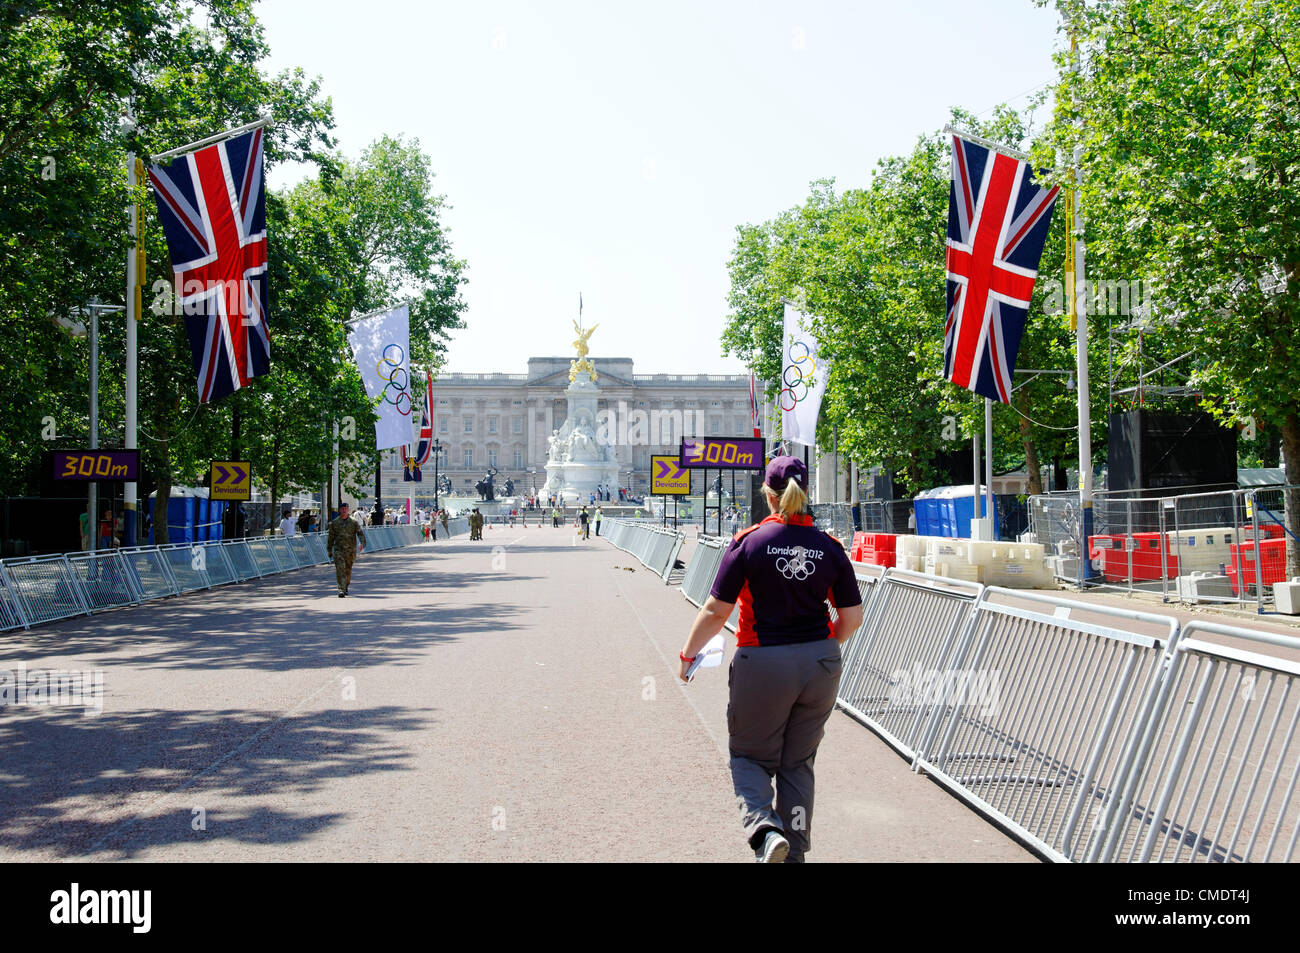 LONDON, UK, Thursday July 26, 2012. One day before London 2012 Olympic Games opening ceremony on the Mall. Stock Photo